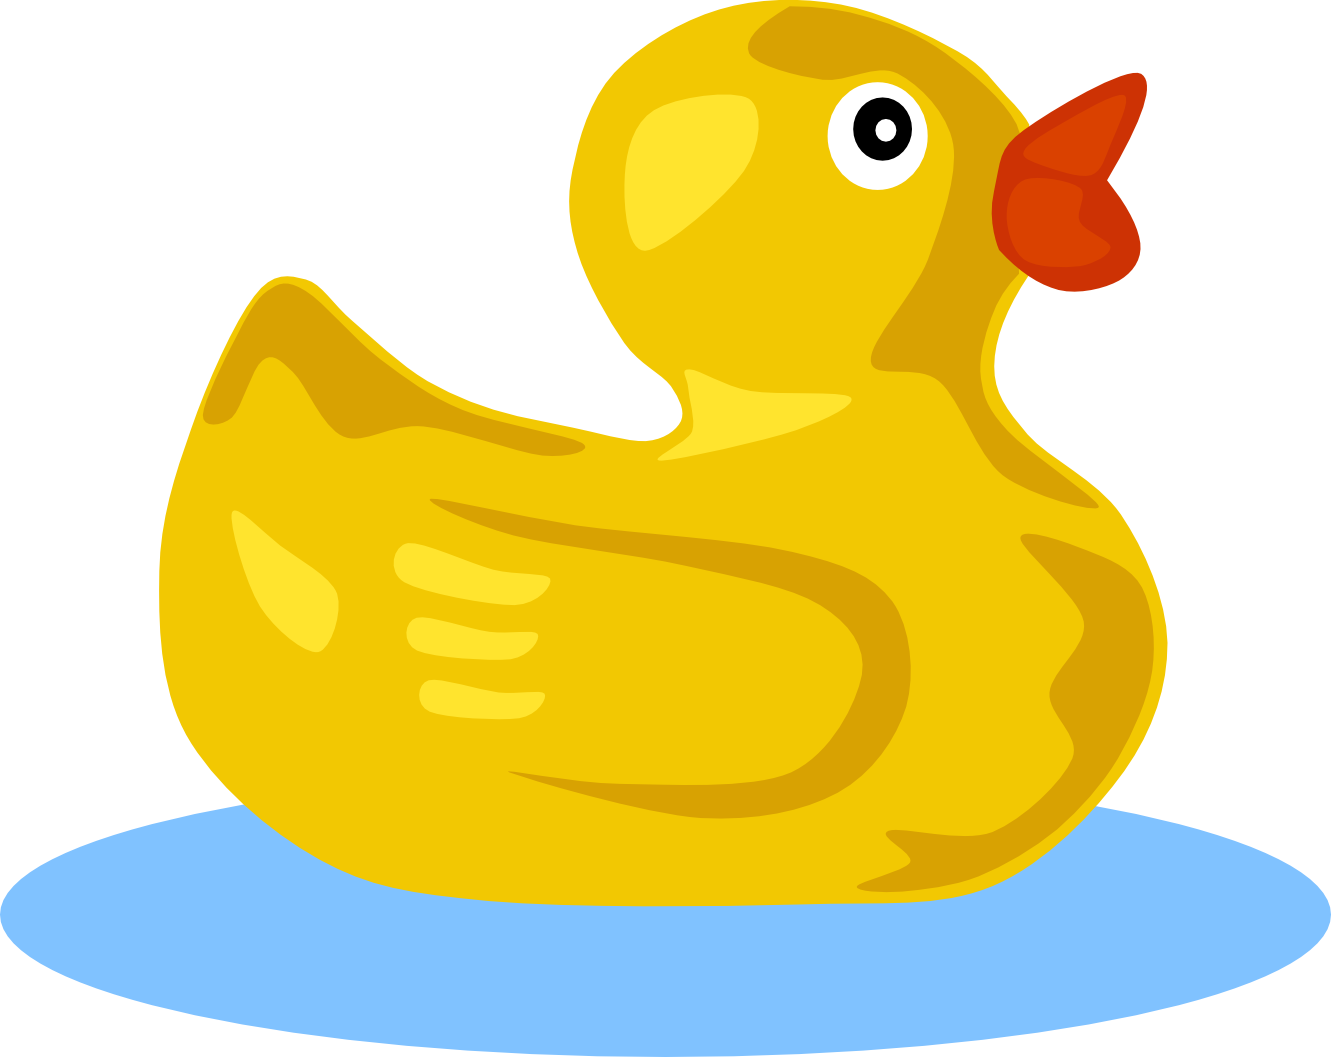 Clip Art: Rubber Duck 1 openclipart.org commons.